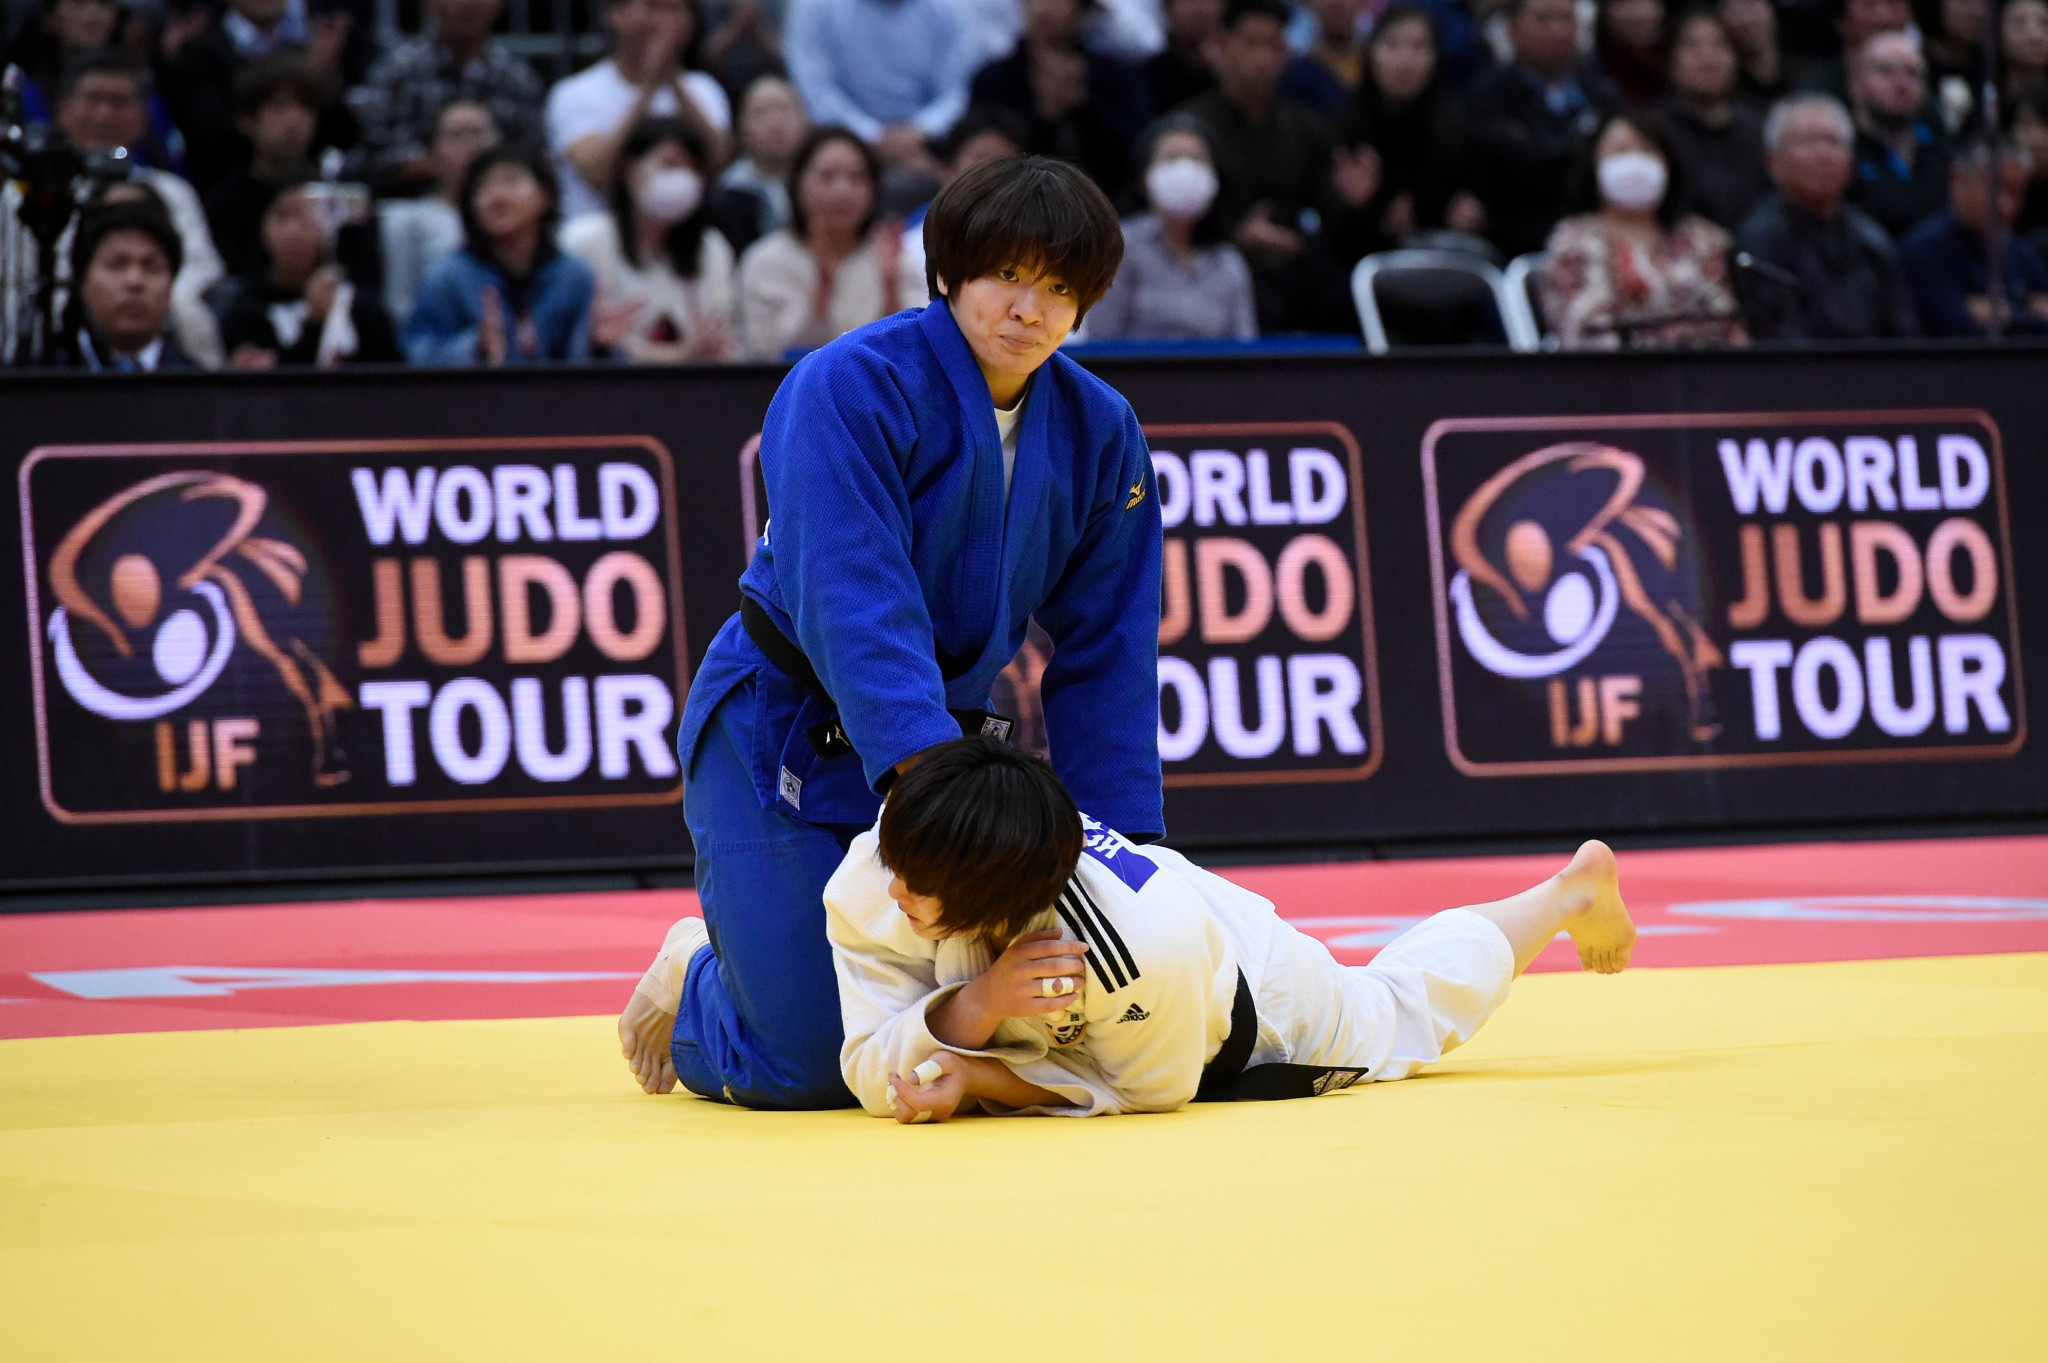 Japan Judo Federation to decide to keep Olympic team or new selection